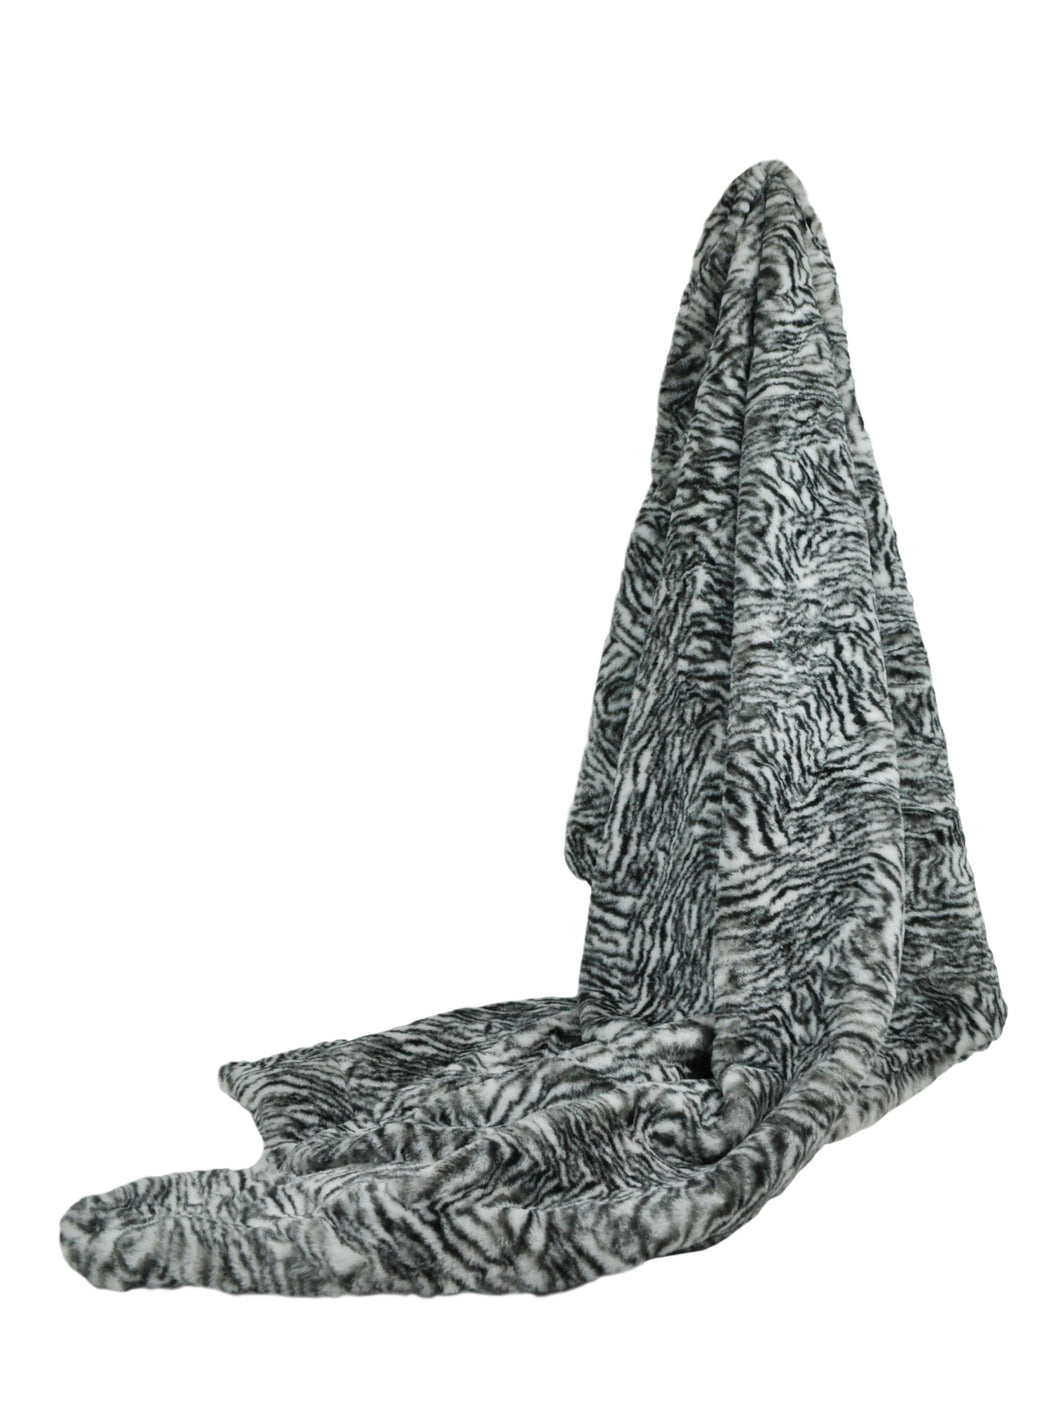 Jenny Mclean New Faux Throws 127x152cm Multi Animal Design throws Blankets